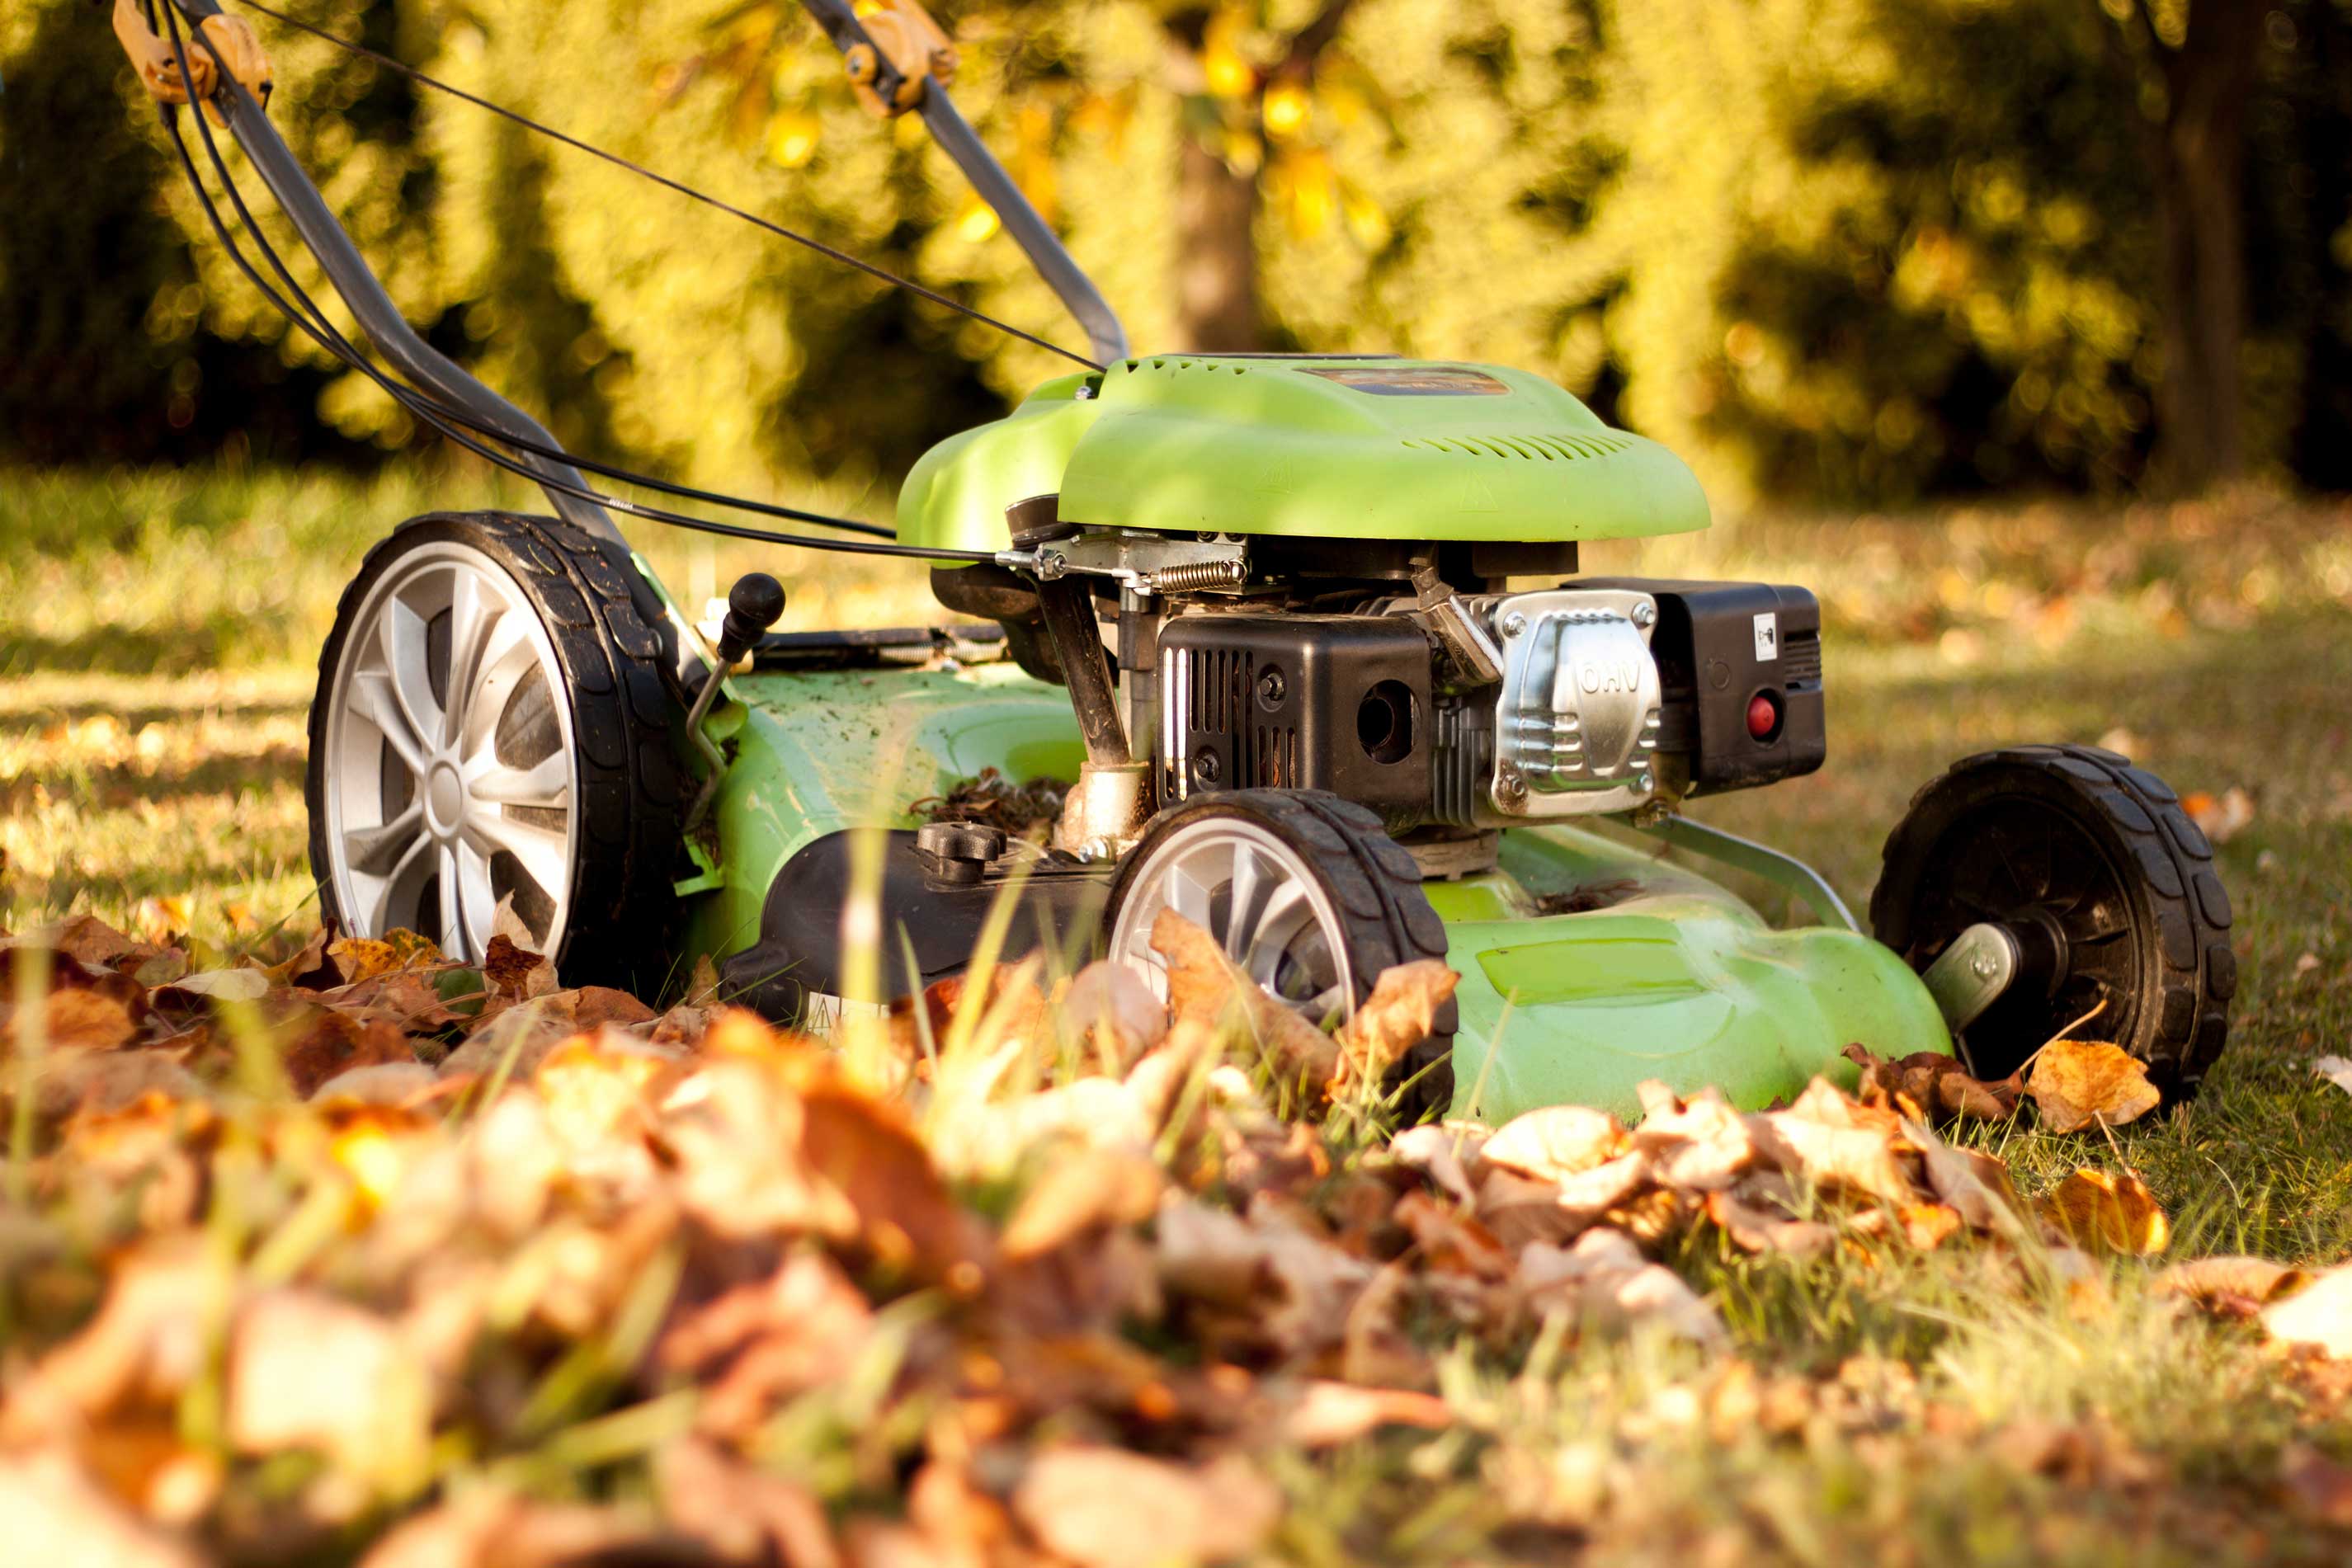 10 Tips for Winterizing Lawn Mowers & Outdoor Power Equipment